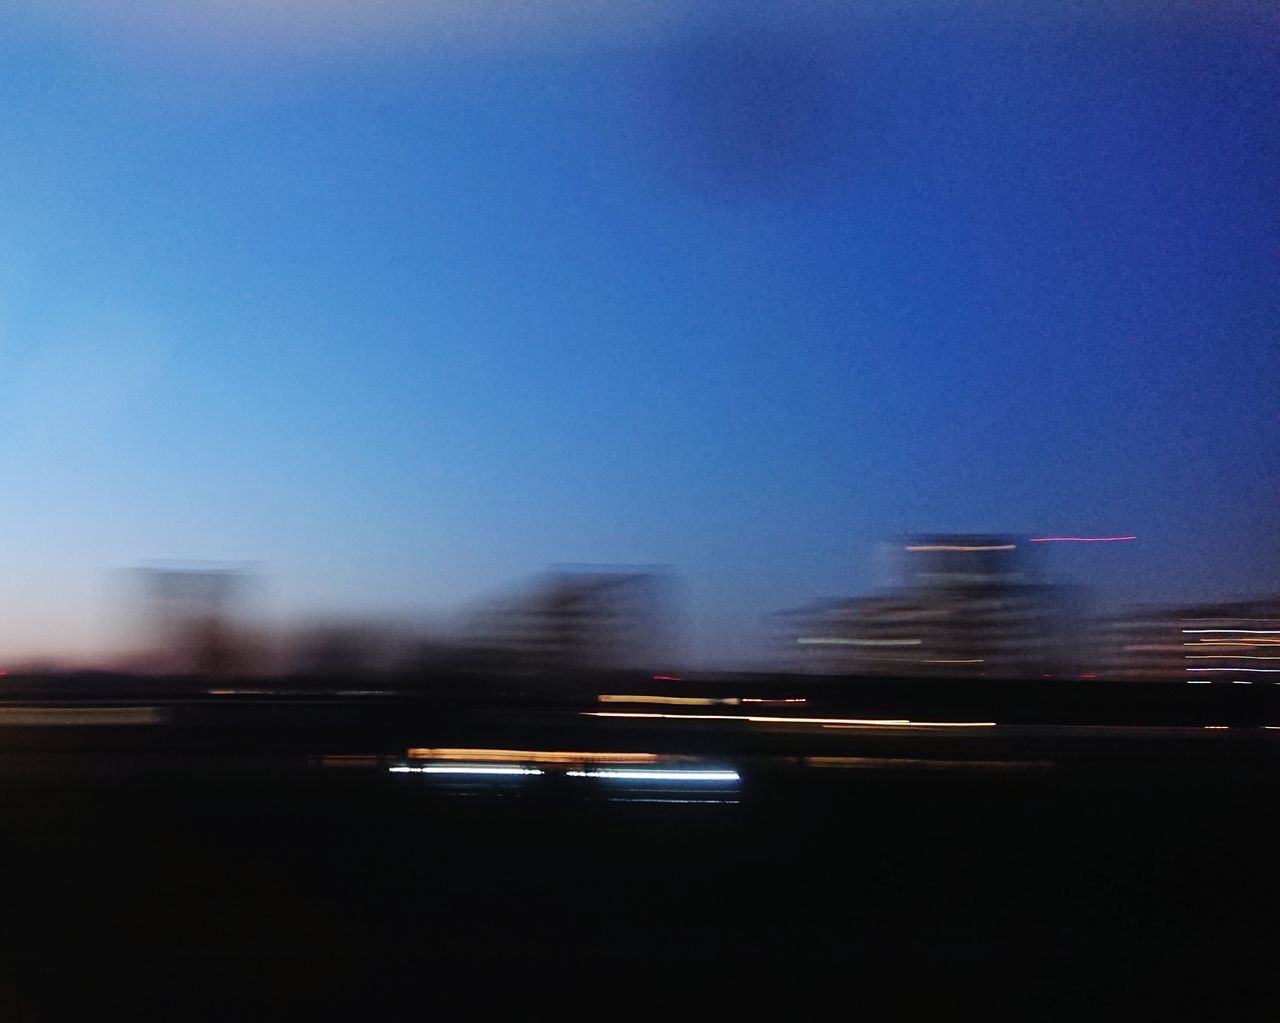 BLURRED MOTION OF VEHICLES ON ROAD IN CITY